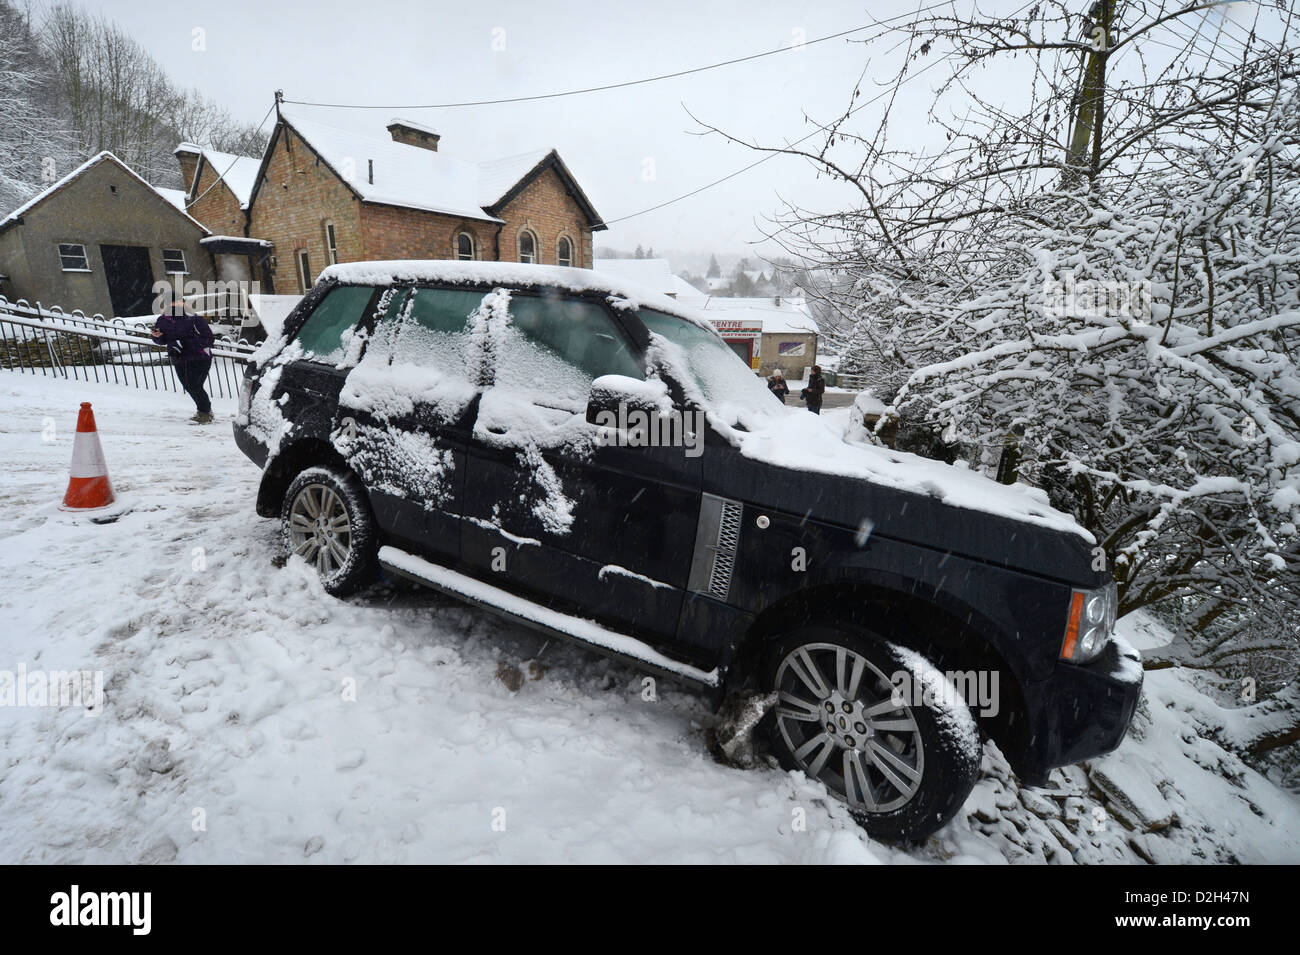 A Range Rover which hit a stationary Vauxhall forcing it into gardens below on a hill known locally are 'The Ladder' in Nailswor Stock Photo